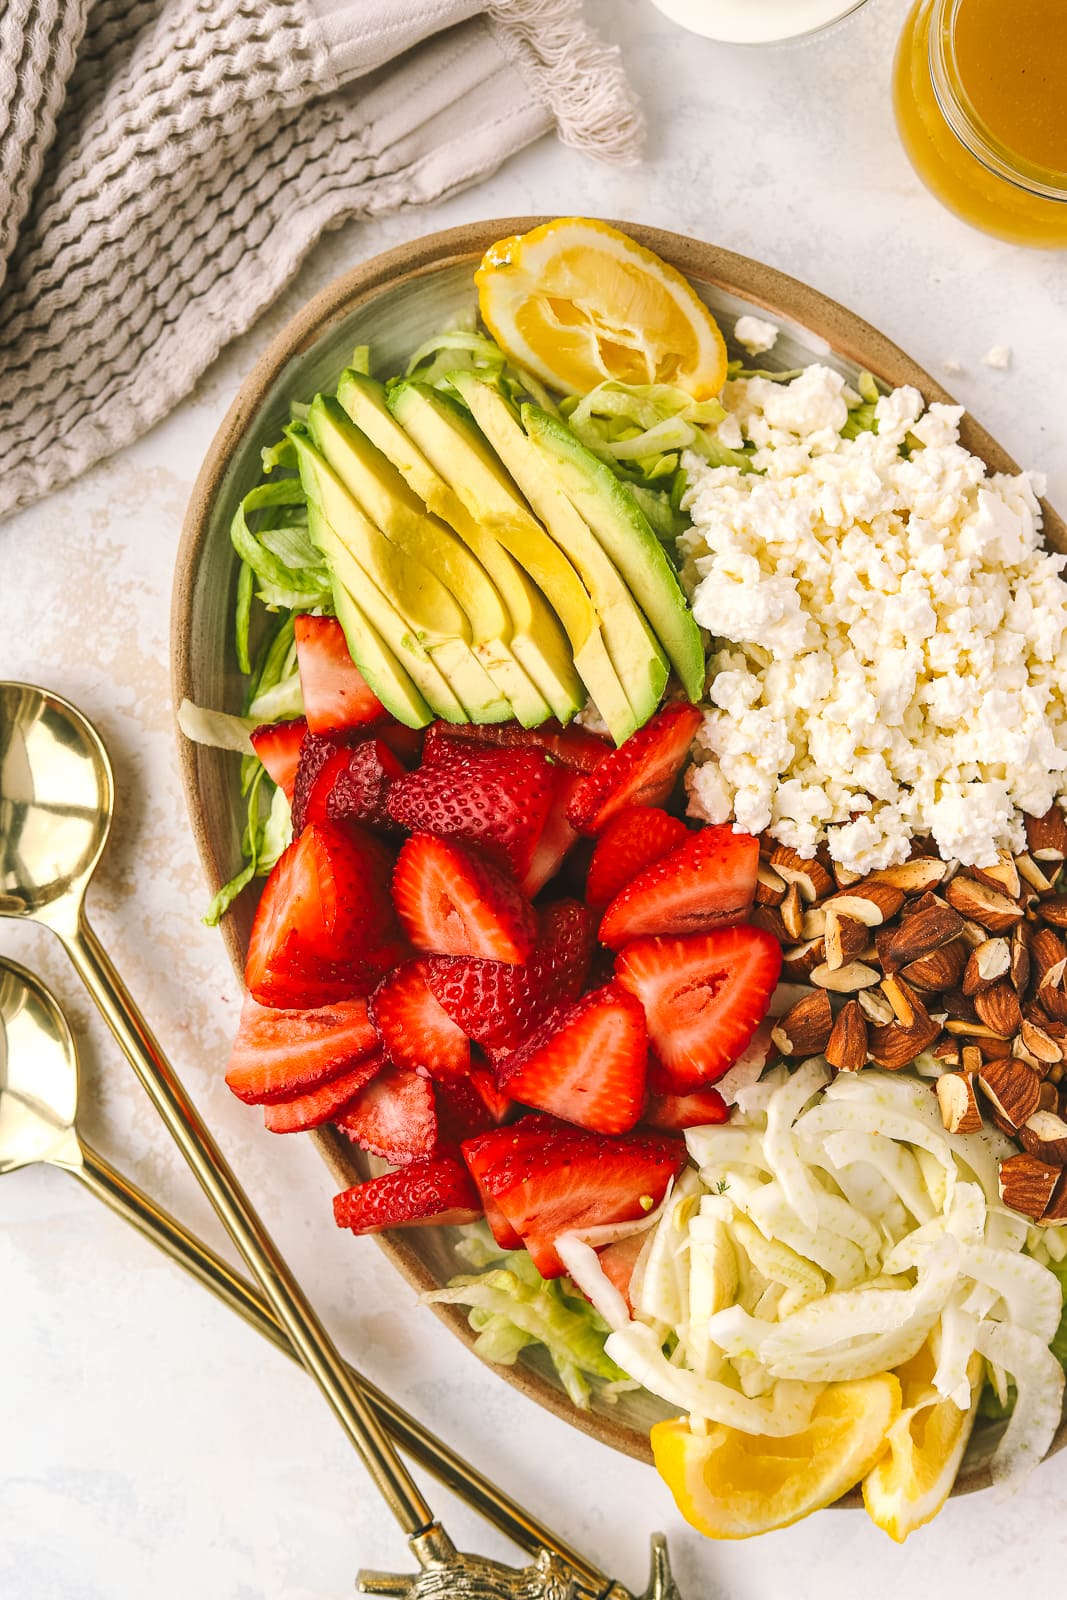 strawberries, avocado, feta, almonds and lettuce on a plate